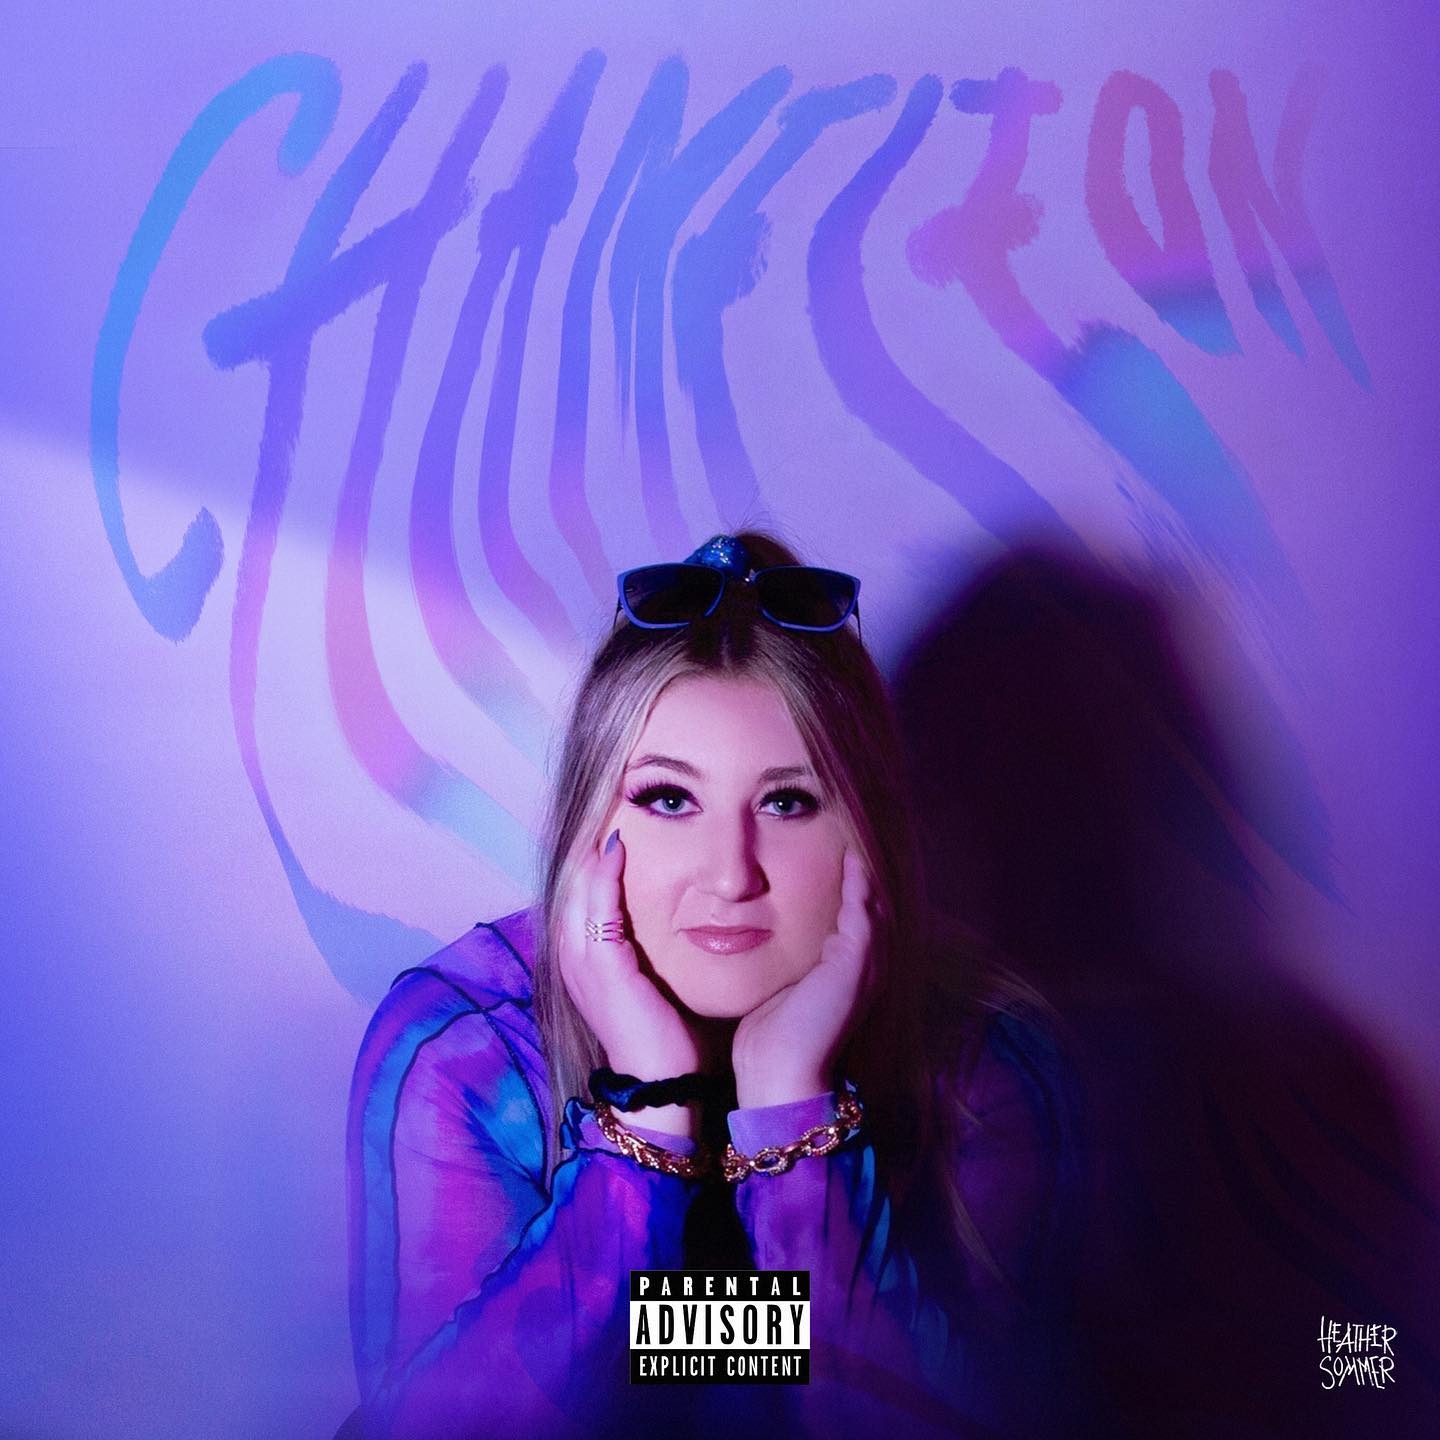 chameleon - Heather Sommer - usa - indie - indie music - indie pop - indie rock - indie folk - new music - music blog - wolf in a suit - wolfinasuit - wolf in a suit blog - wolf in a suit music blog